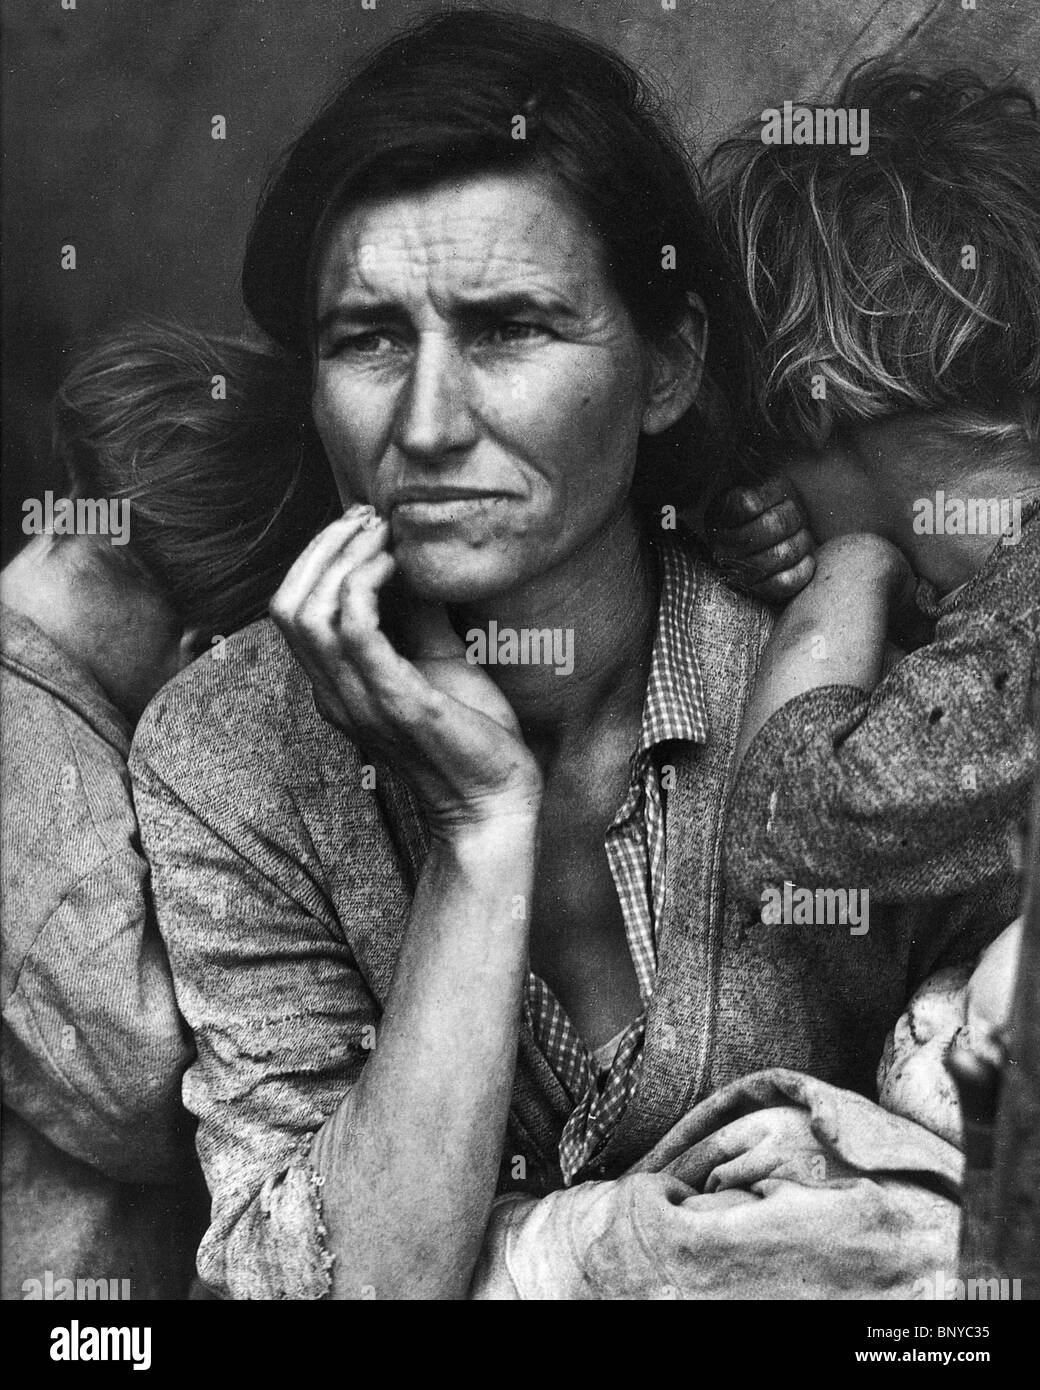 MIGRANT MOTHER - Dorothea Lange's iconic photo taken during the American Depression in 1936 - see Description below Stock Photo